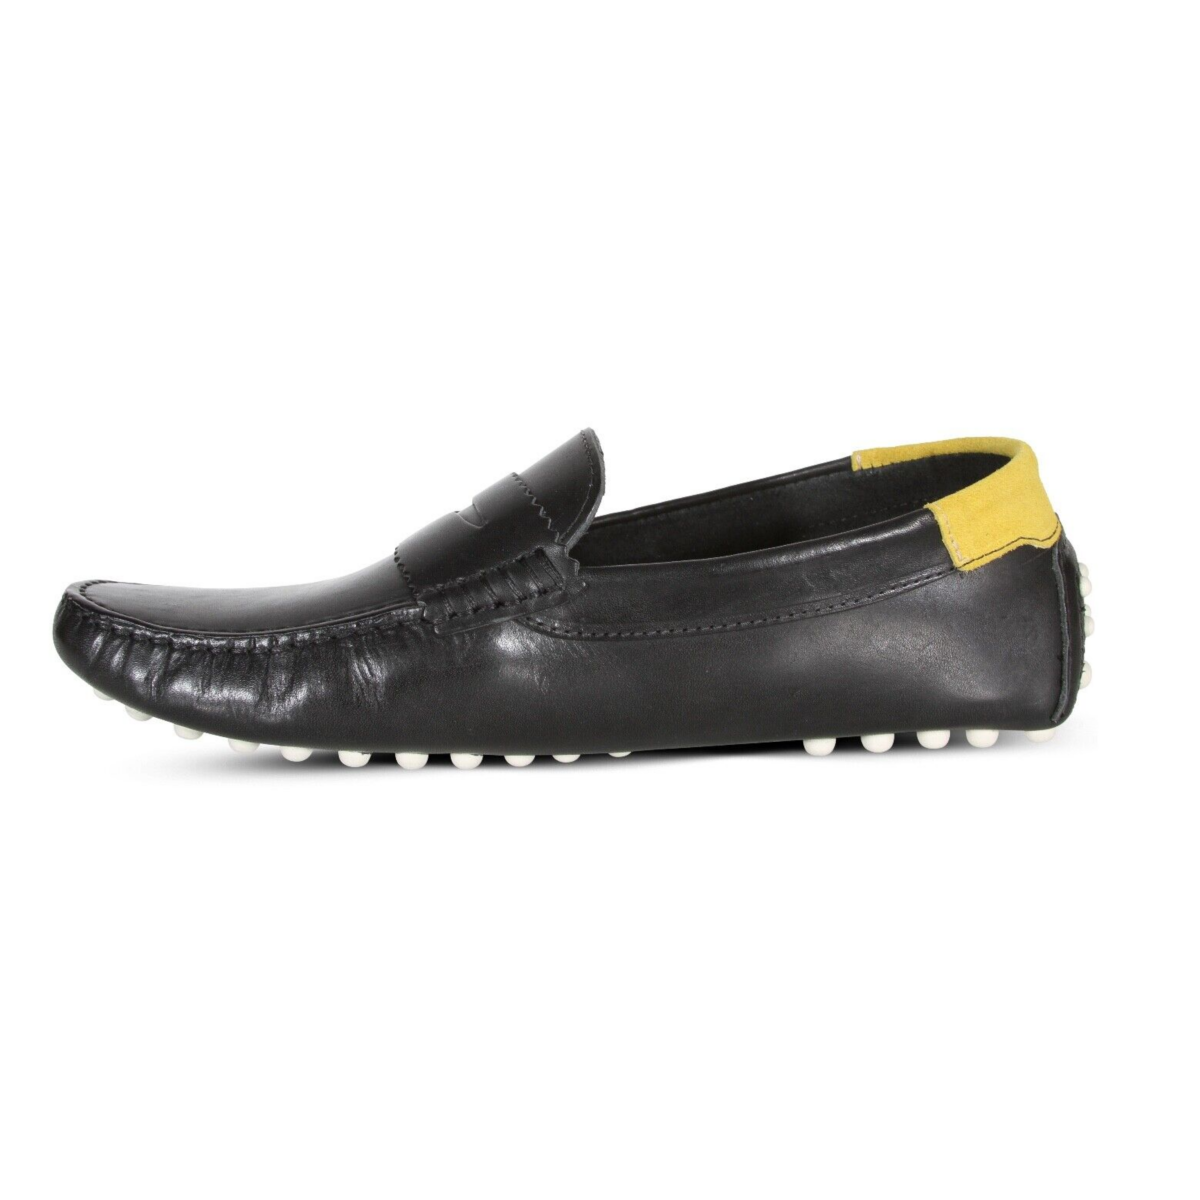 LACOSTE 7-45CMA0032454 CONCOURS 123 MN'S (Medium) Black/Off White Leather Lifestyle Loafers